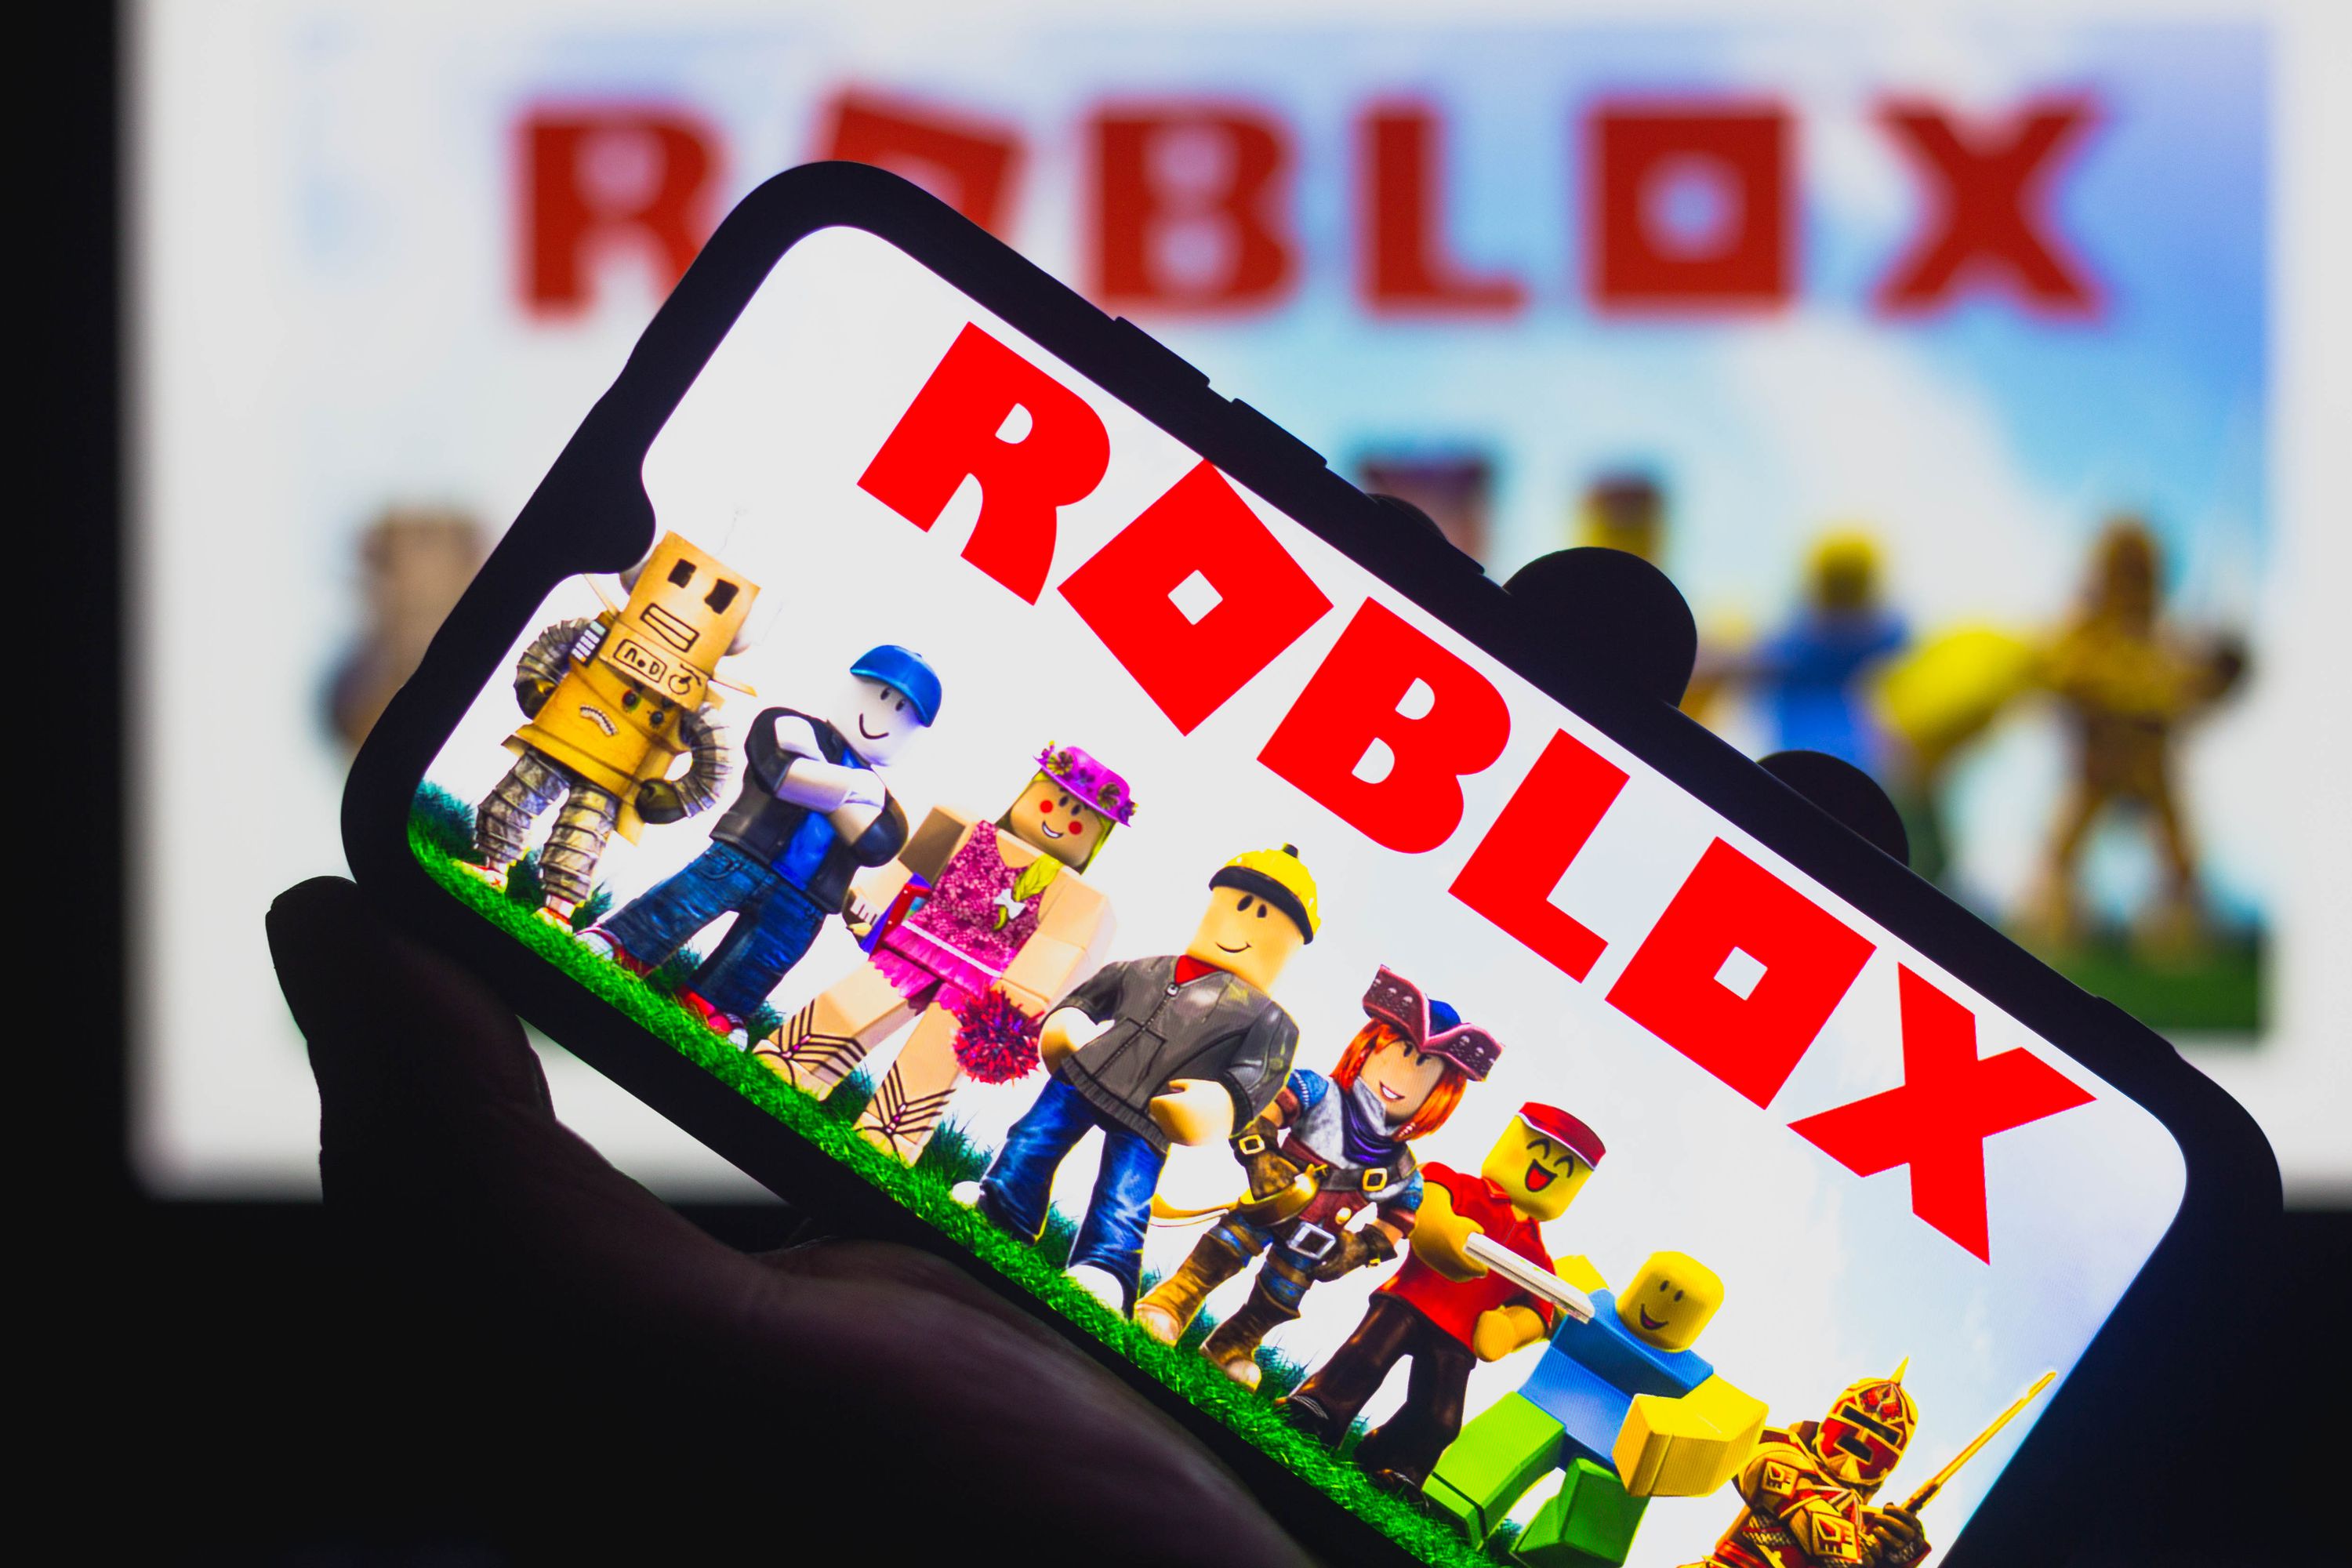 Roblox to allow 17 and over experiences - The Verge